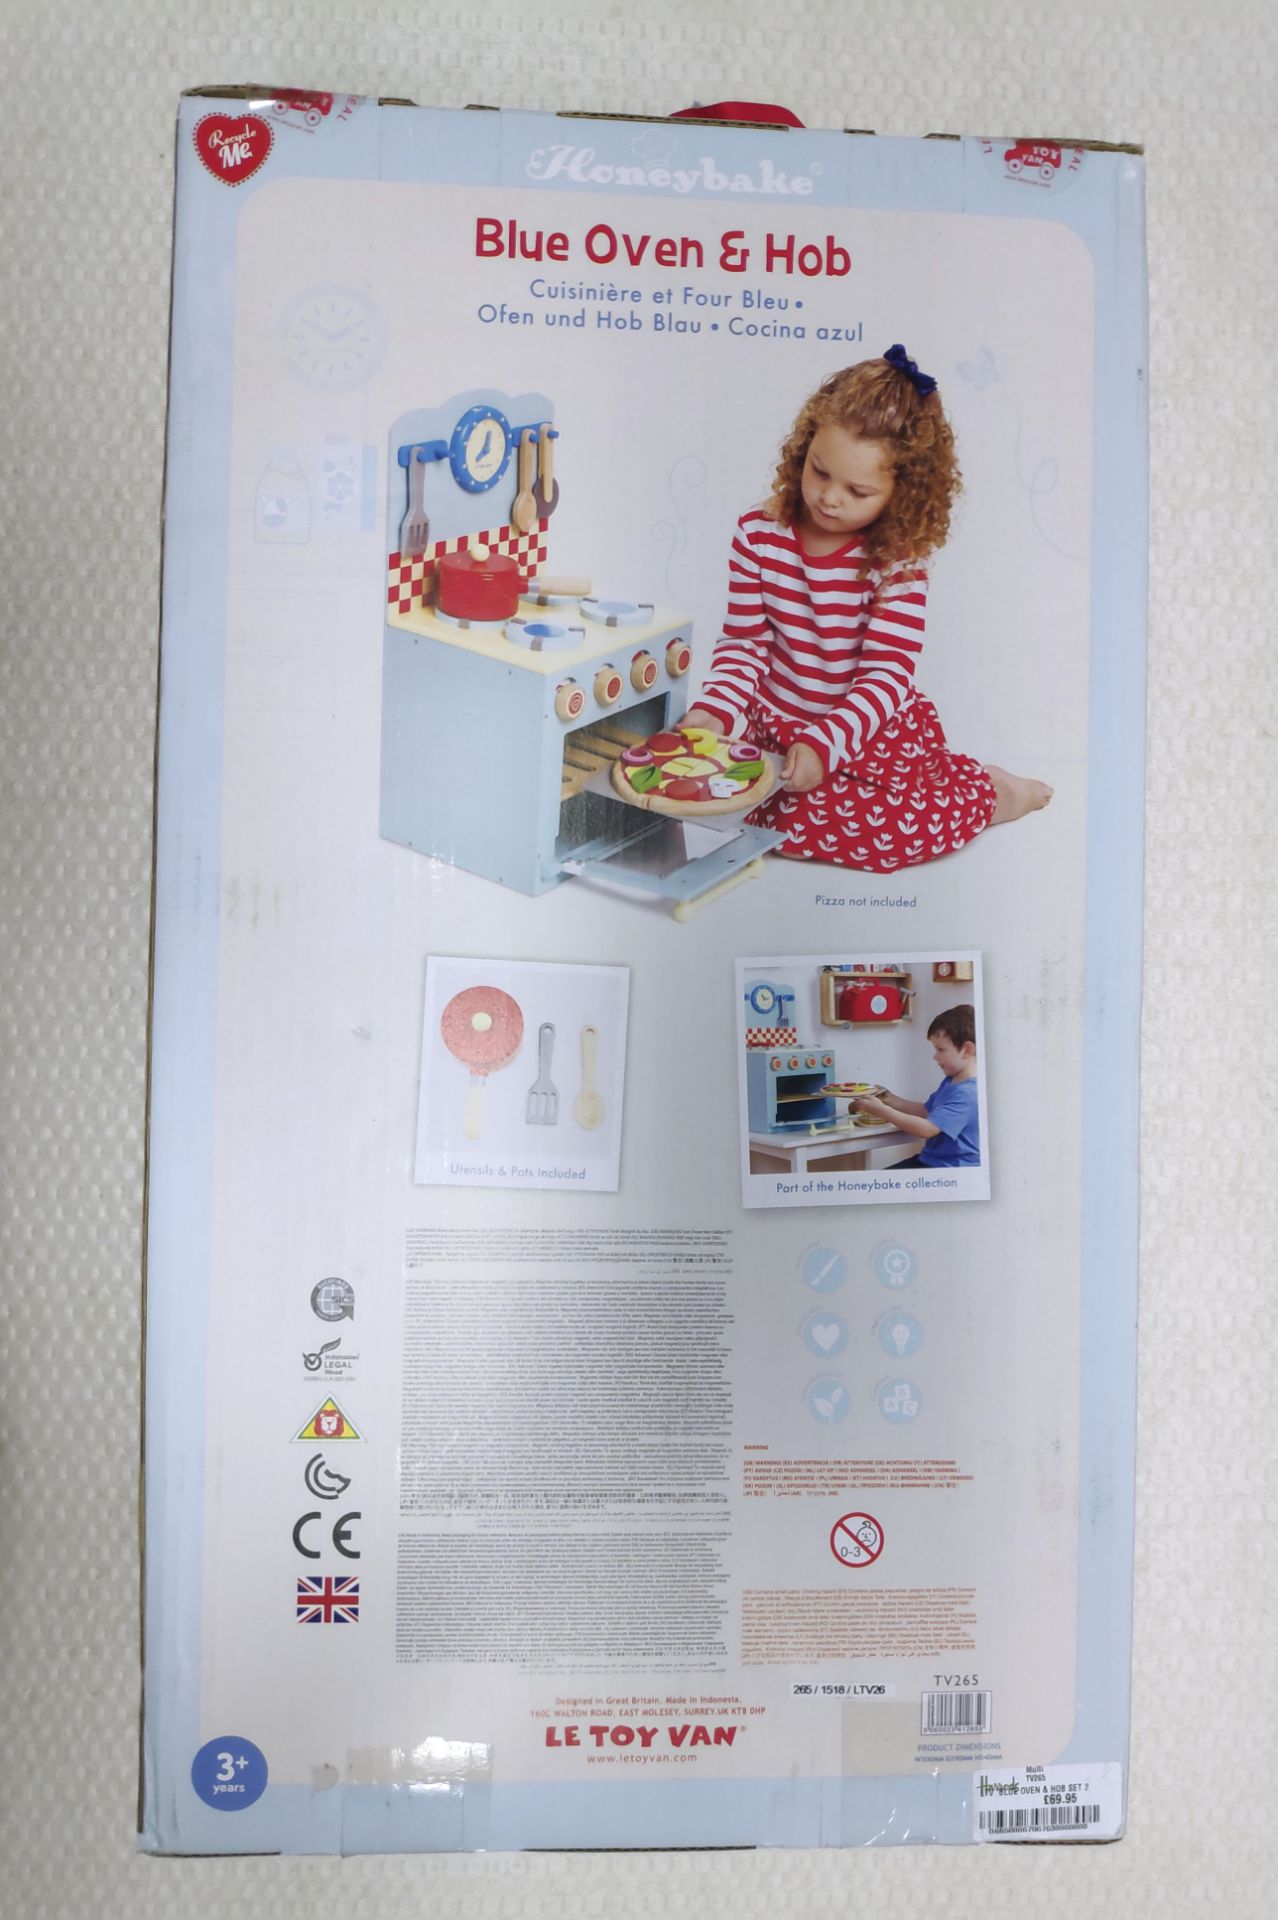 1 x Le Toy Van Honeybake Childrens Wooden Blue Oven & Hob - New/Boxed - Image 5 of 7